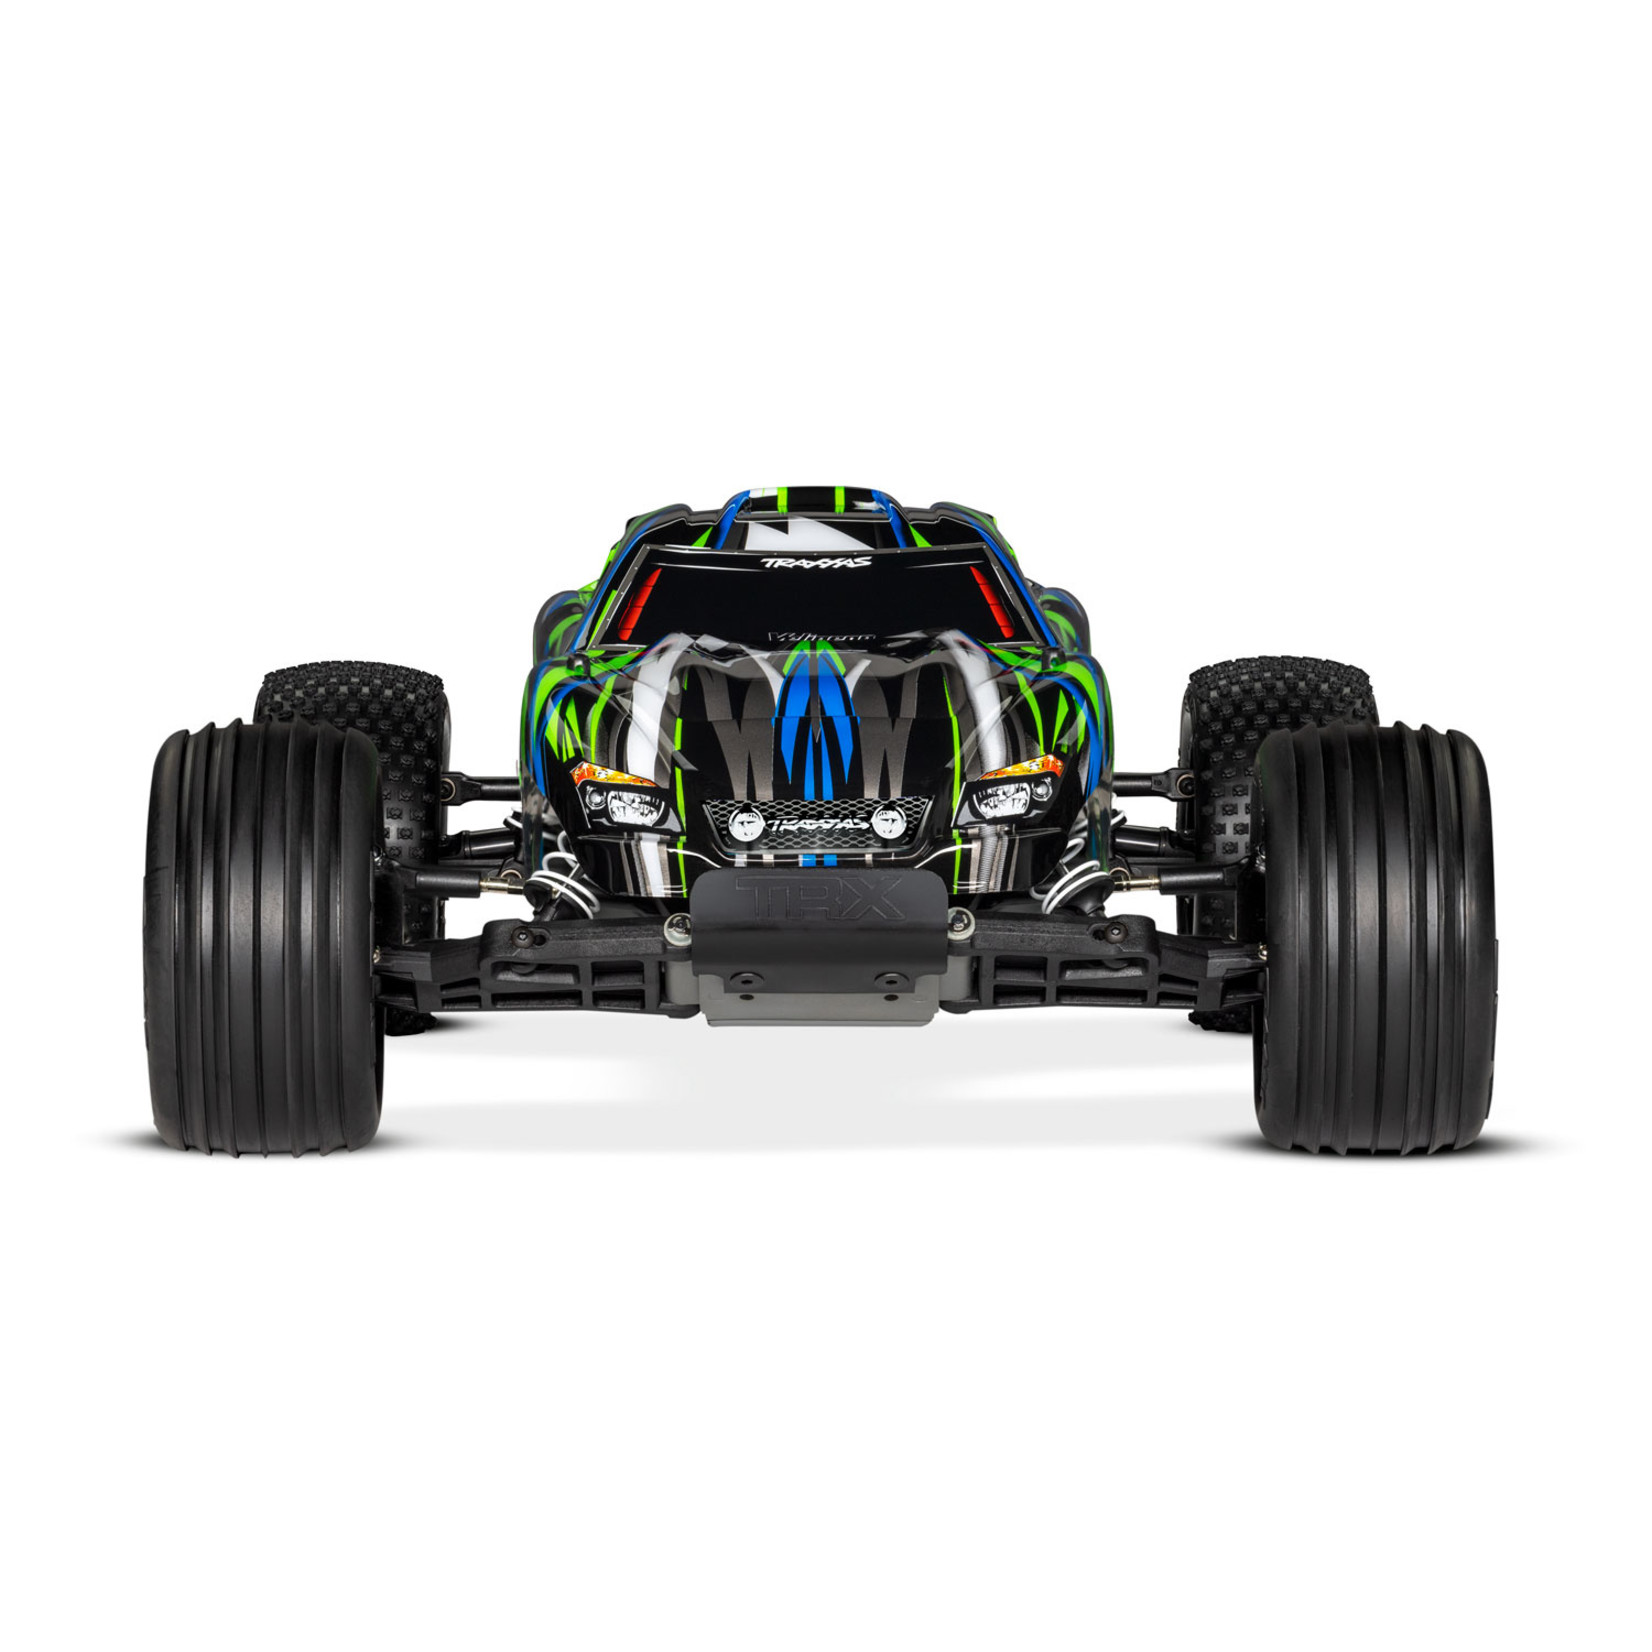 Traxxas 37076-74-GRN Rustler® VXL:  1/10 Scale Stadium Truck with TQi™ Traxxas Link™ Enabled 2.4GHz Radio System & Traxxas Stability Management (TSM)®